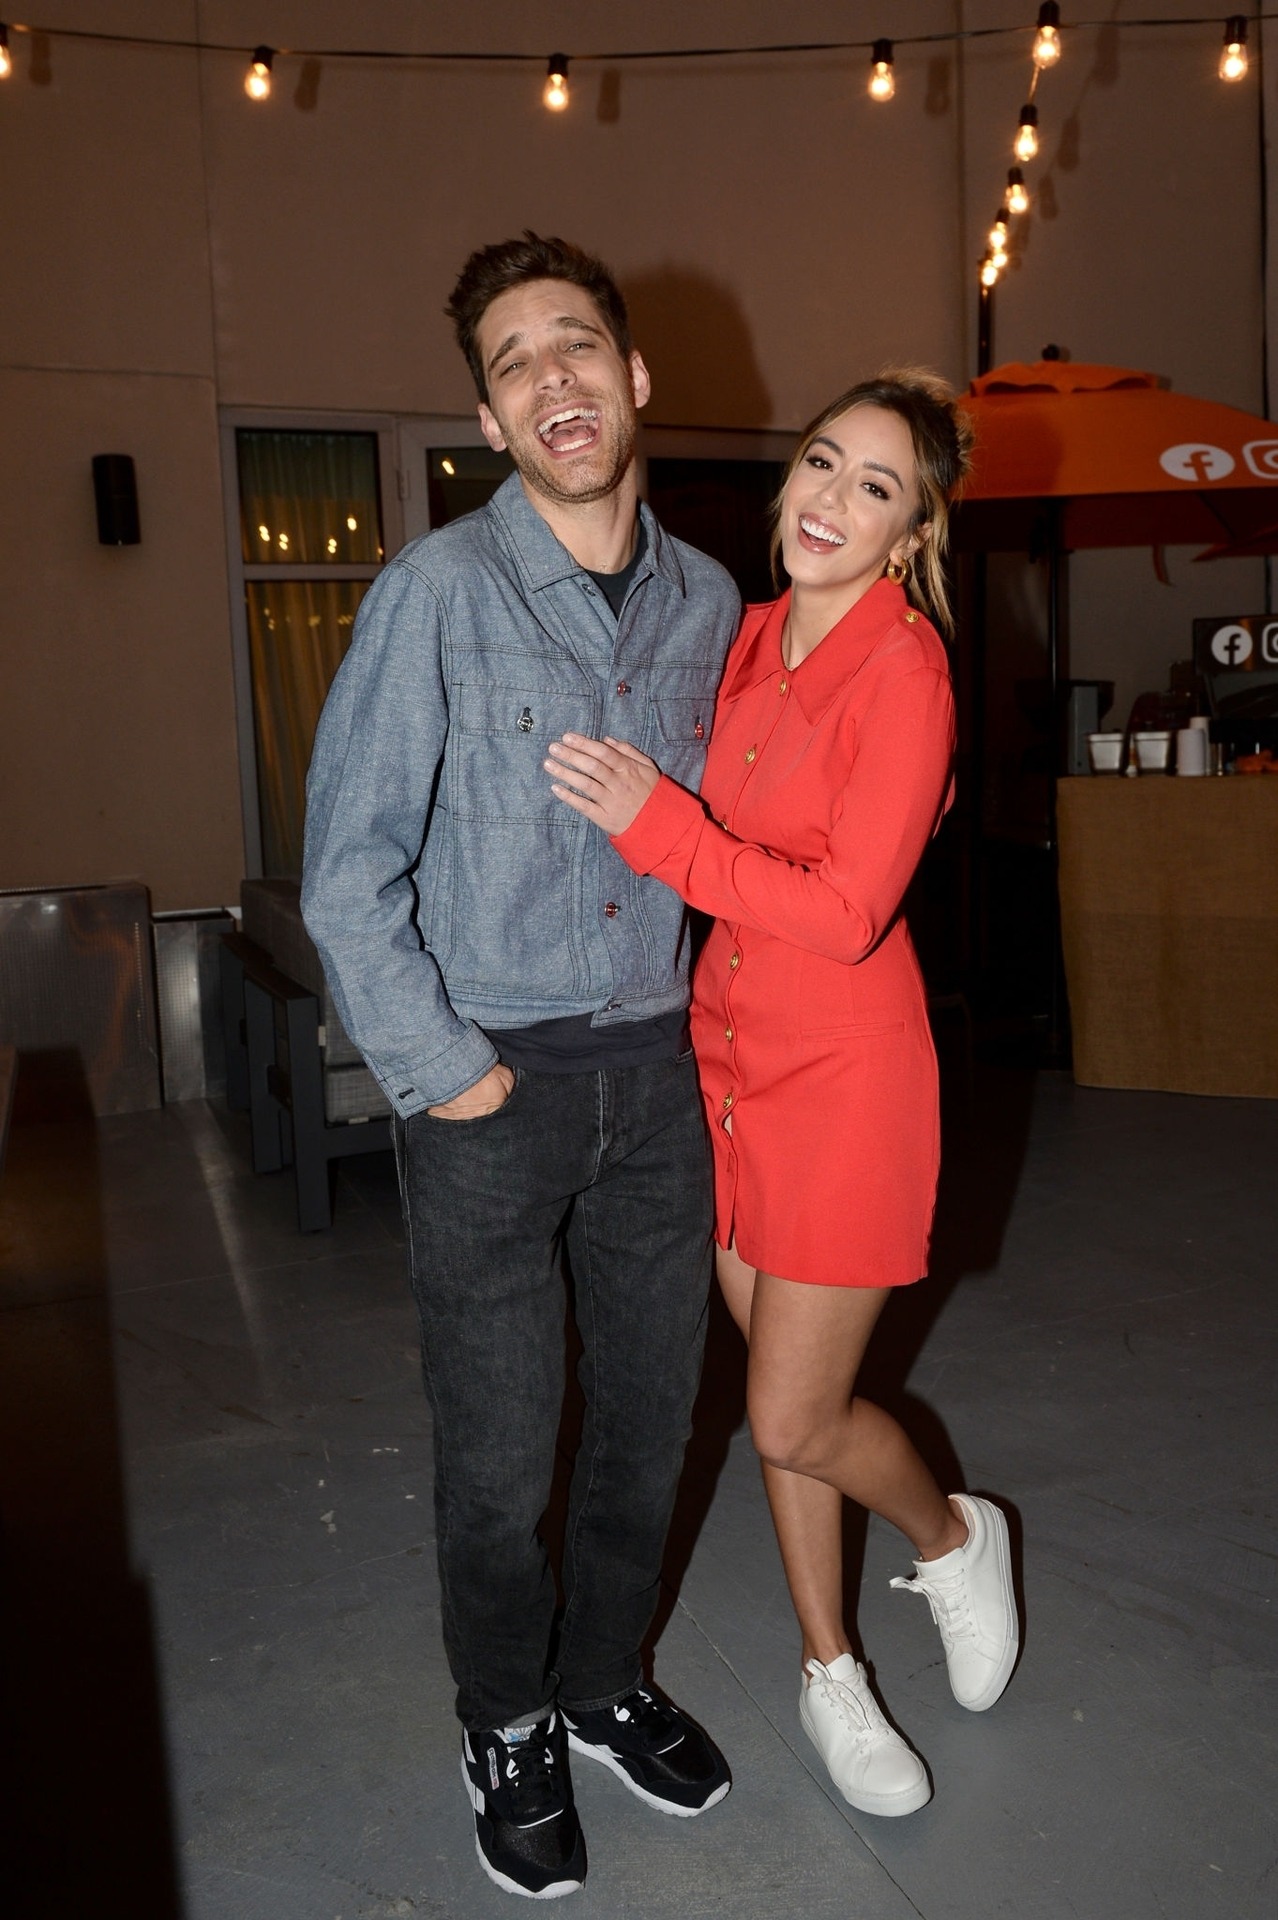 Chloe Bennet And Jeff Ward Attend The "After Dark" Source.